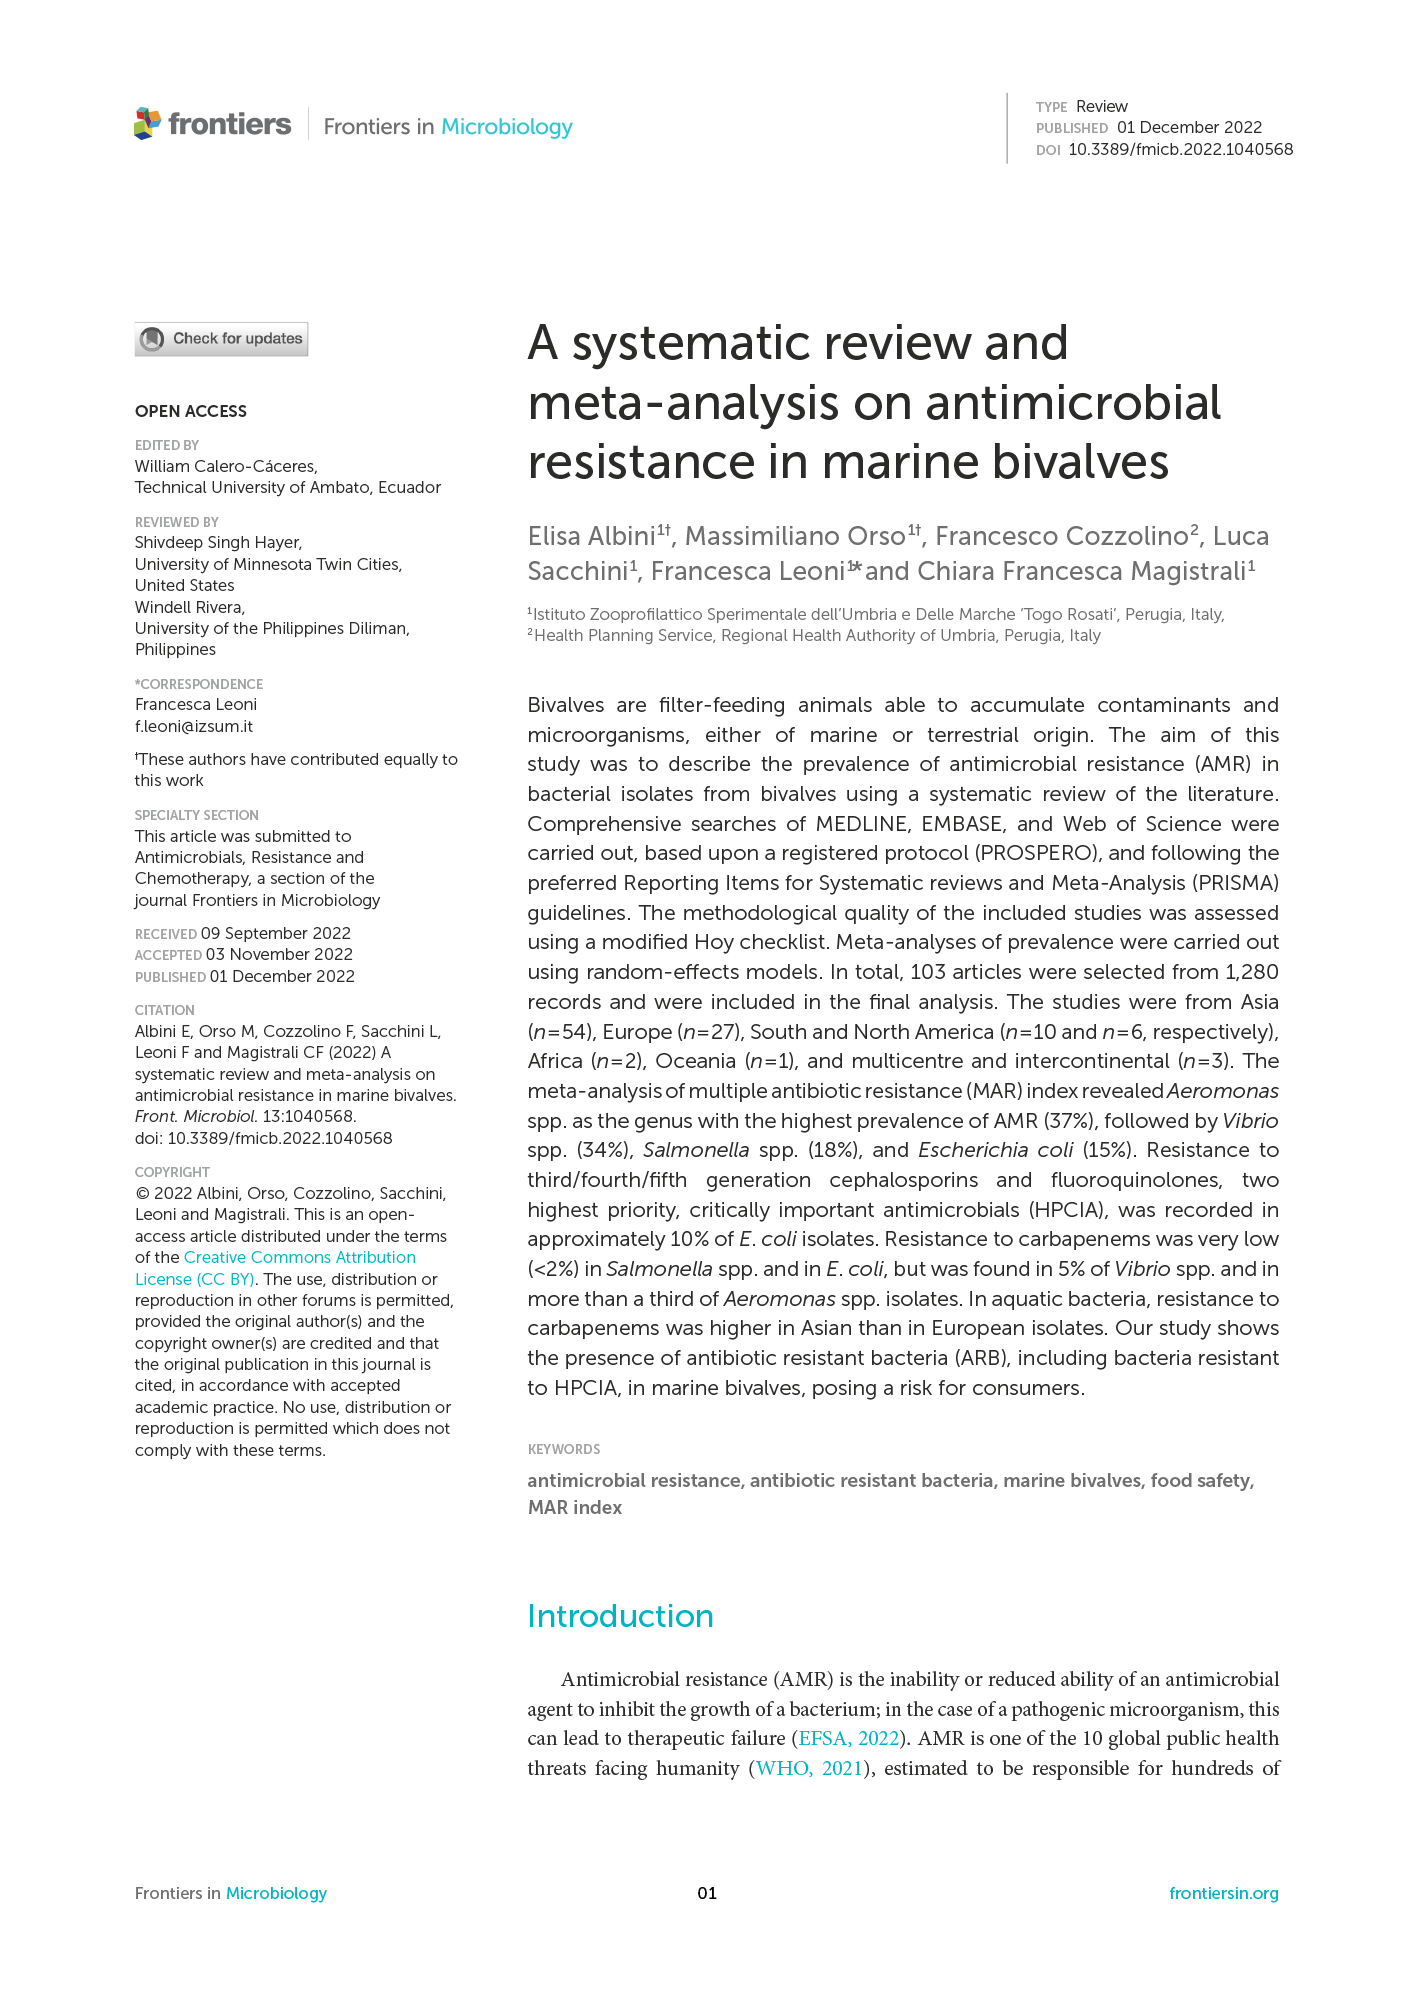 A systematic review and meta-analysis on antimicrobial